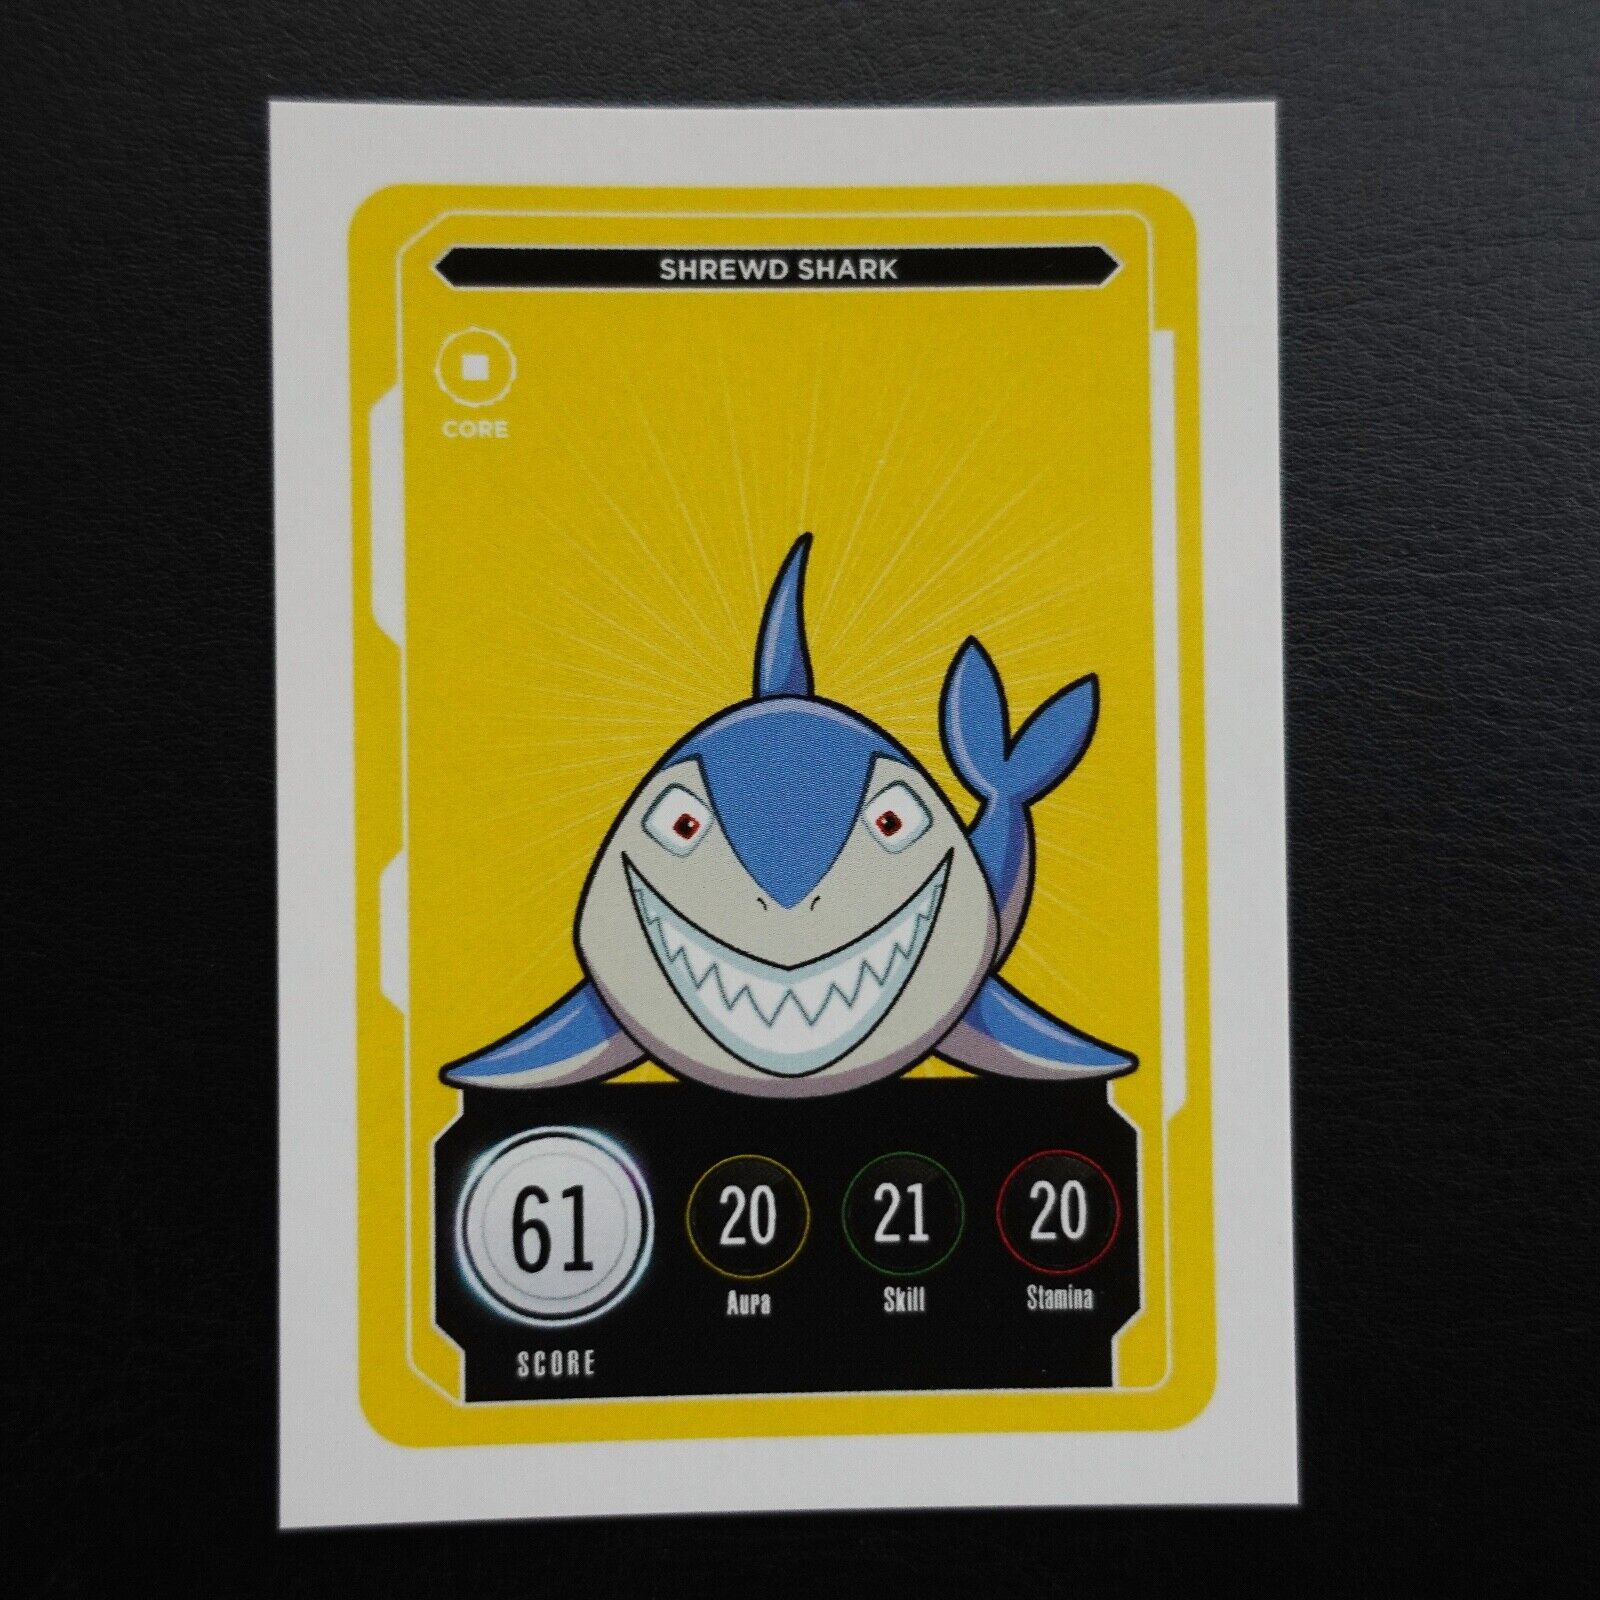 Shrewd Shark Veefriends Compete And Collect Series 2 Trading Card Gary Vee